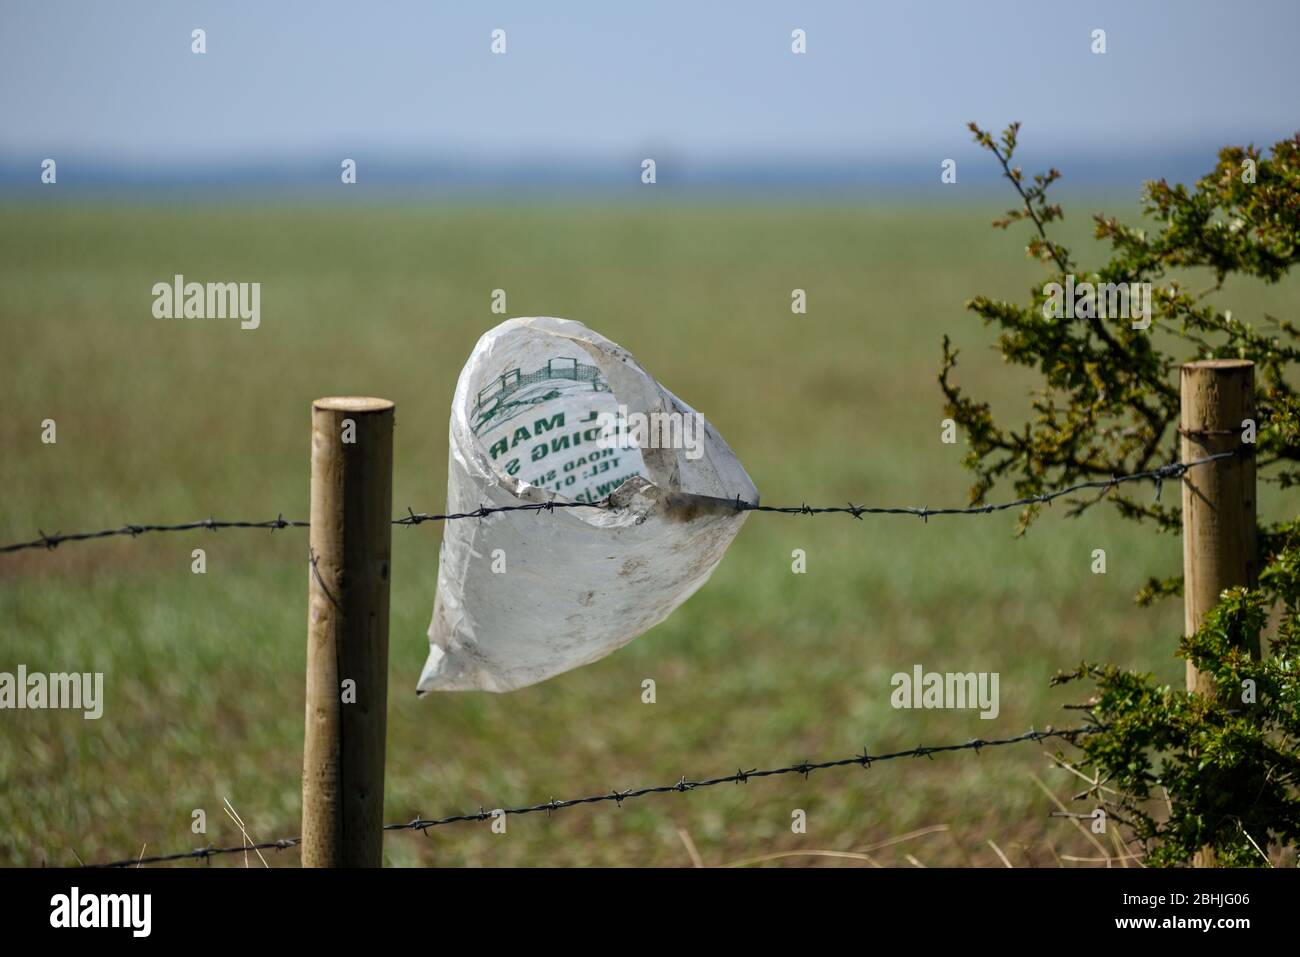 Plastic bag caught on a wire fence polluting the countryside and planet. Stock Photo